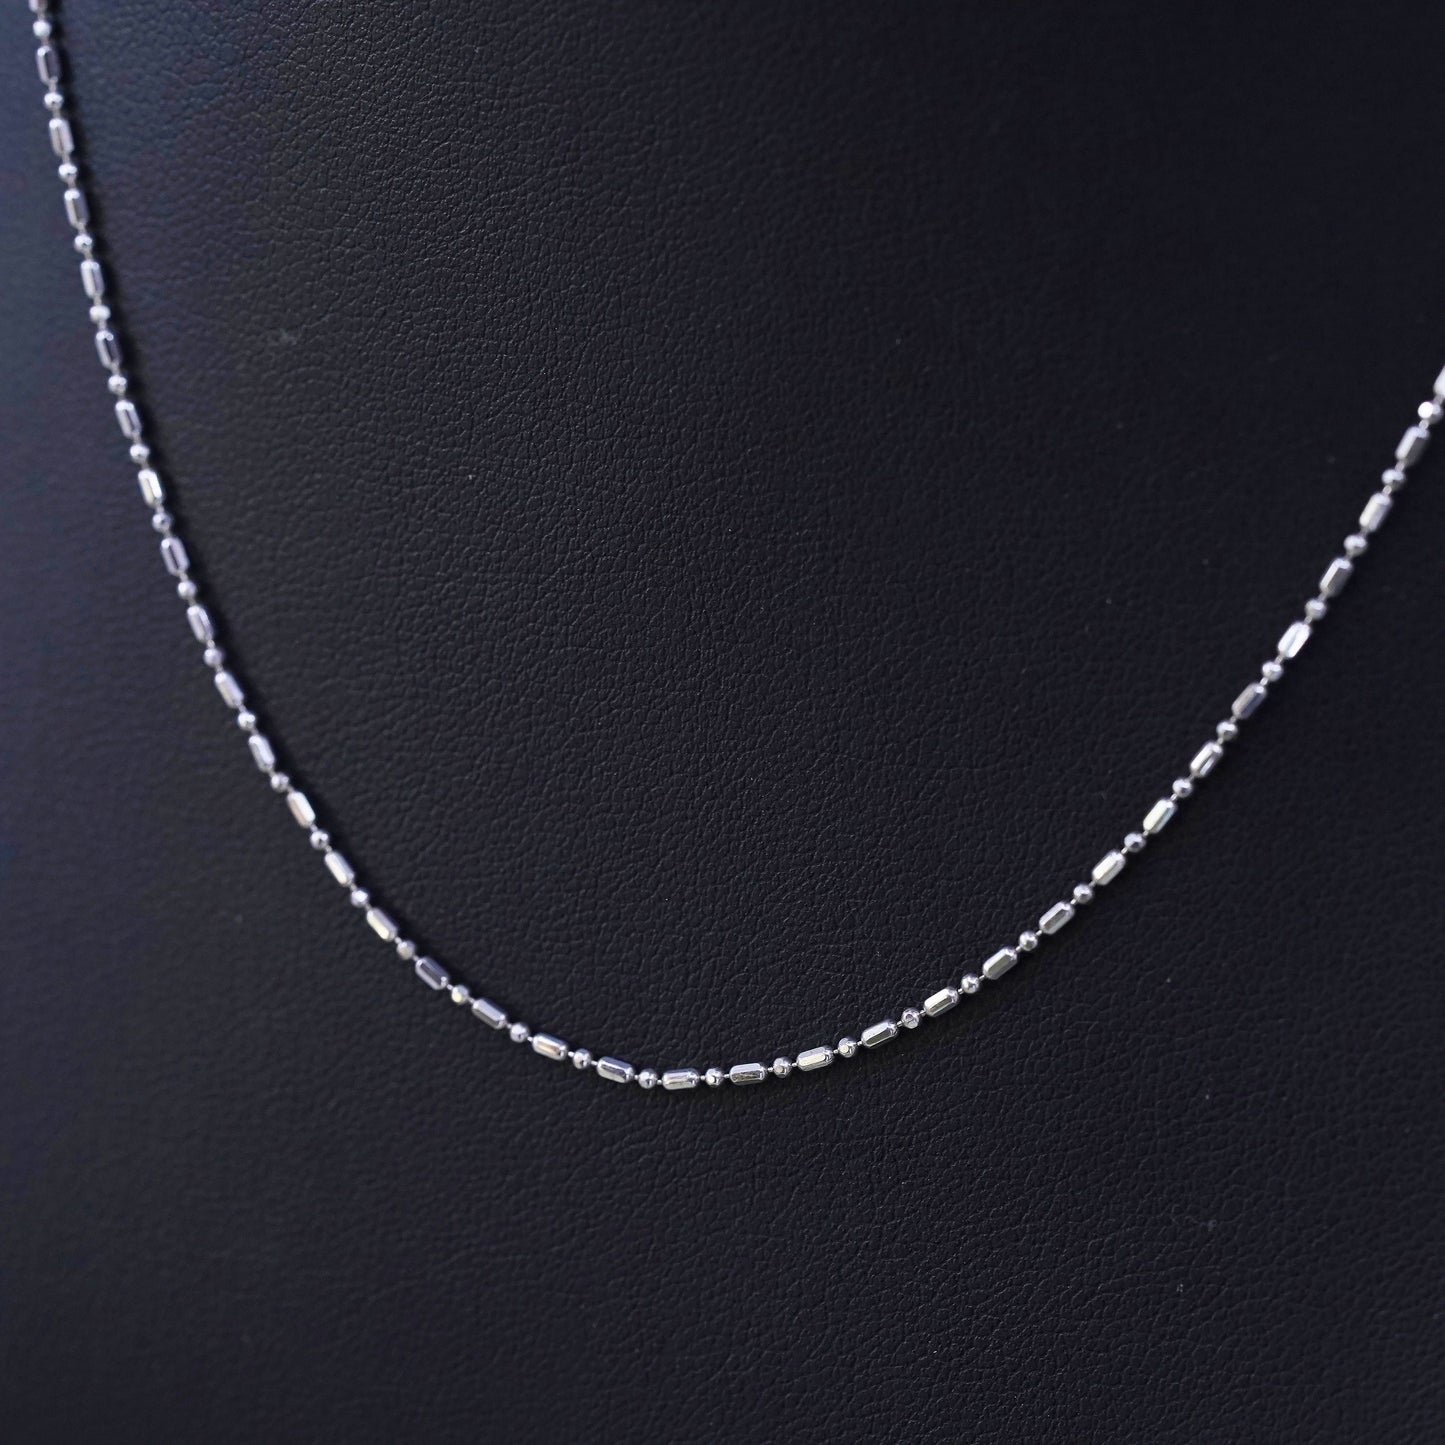 16", 1mm, Vintage sterling silver beads chain, 925 necklace